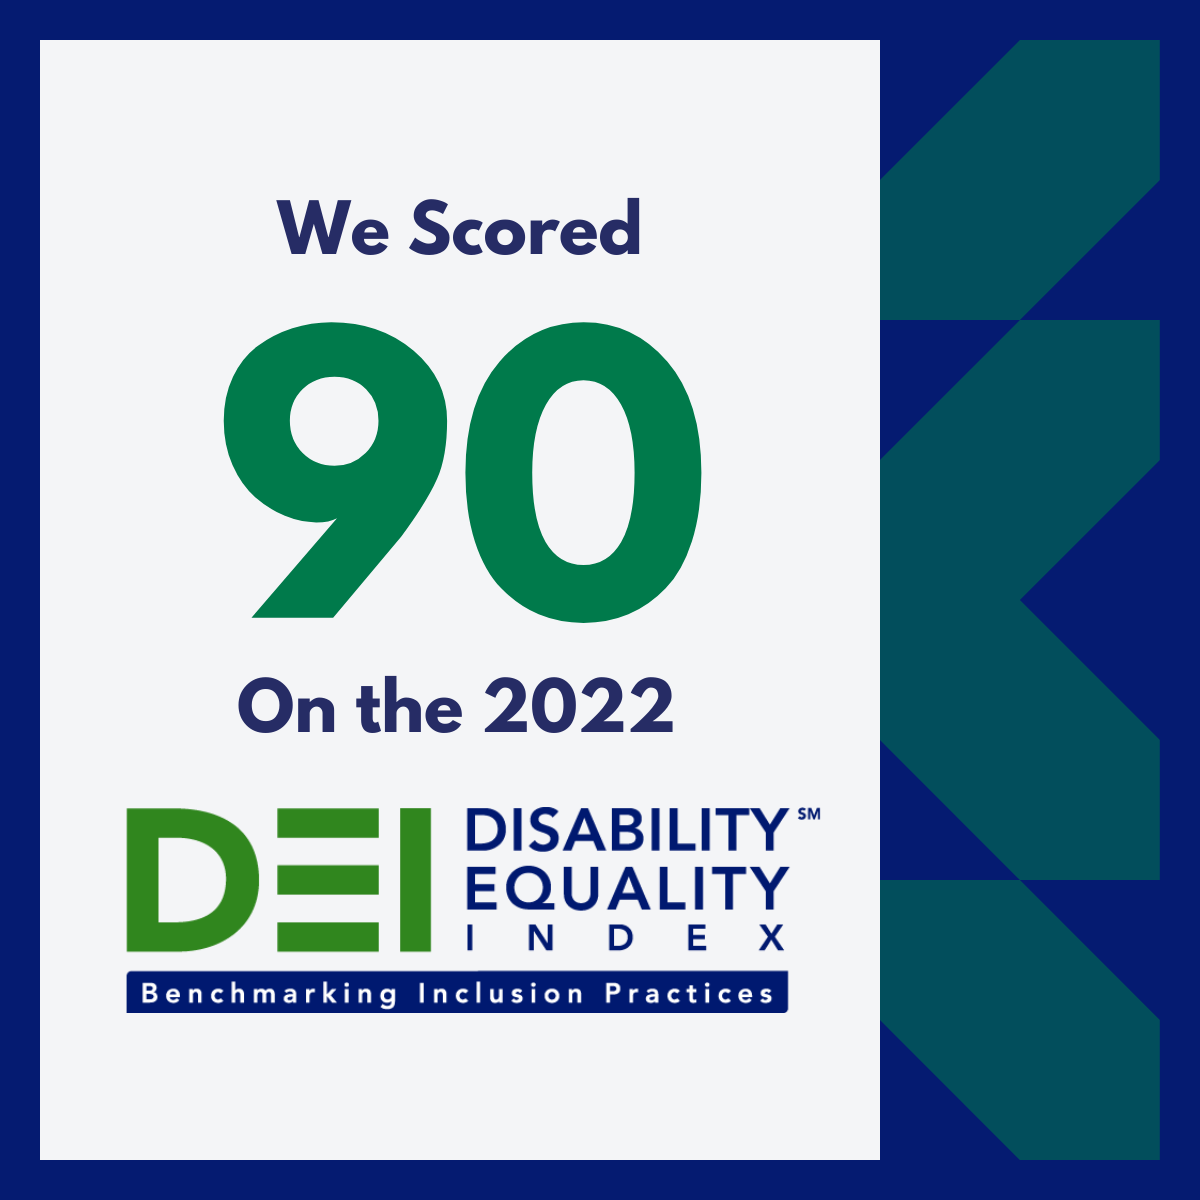 We’re proud to announce that we have been recognized as a “Best Place to Work for Disability Inclusion,” scoring 90 out of 100 in the Disability Equality Index® (DEI) for the second year in a row.